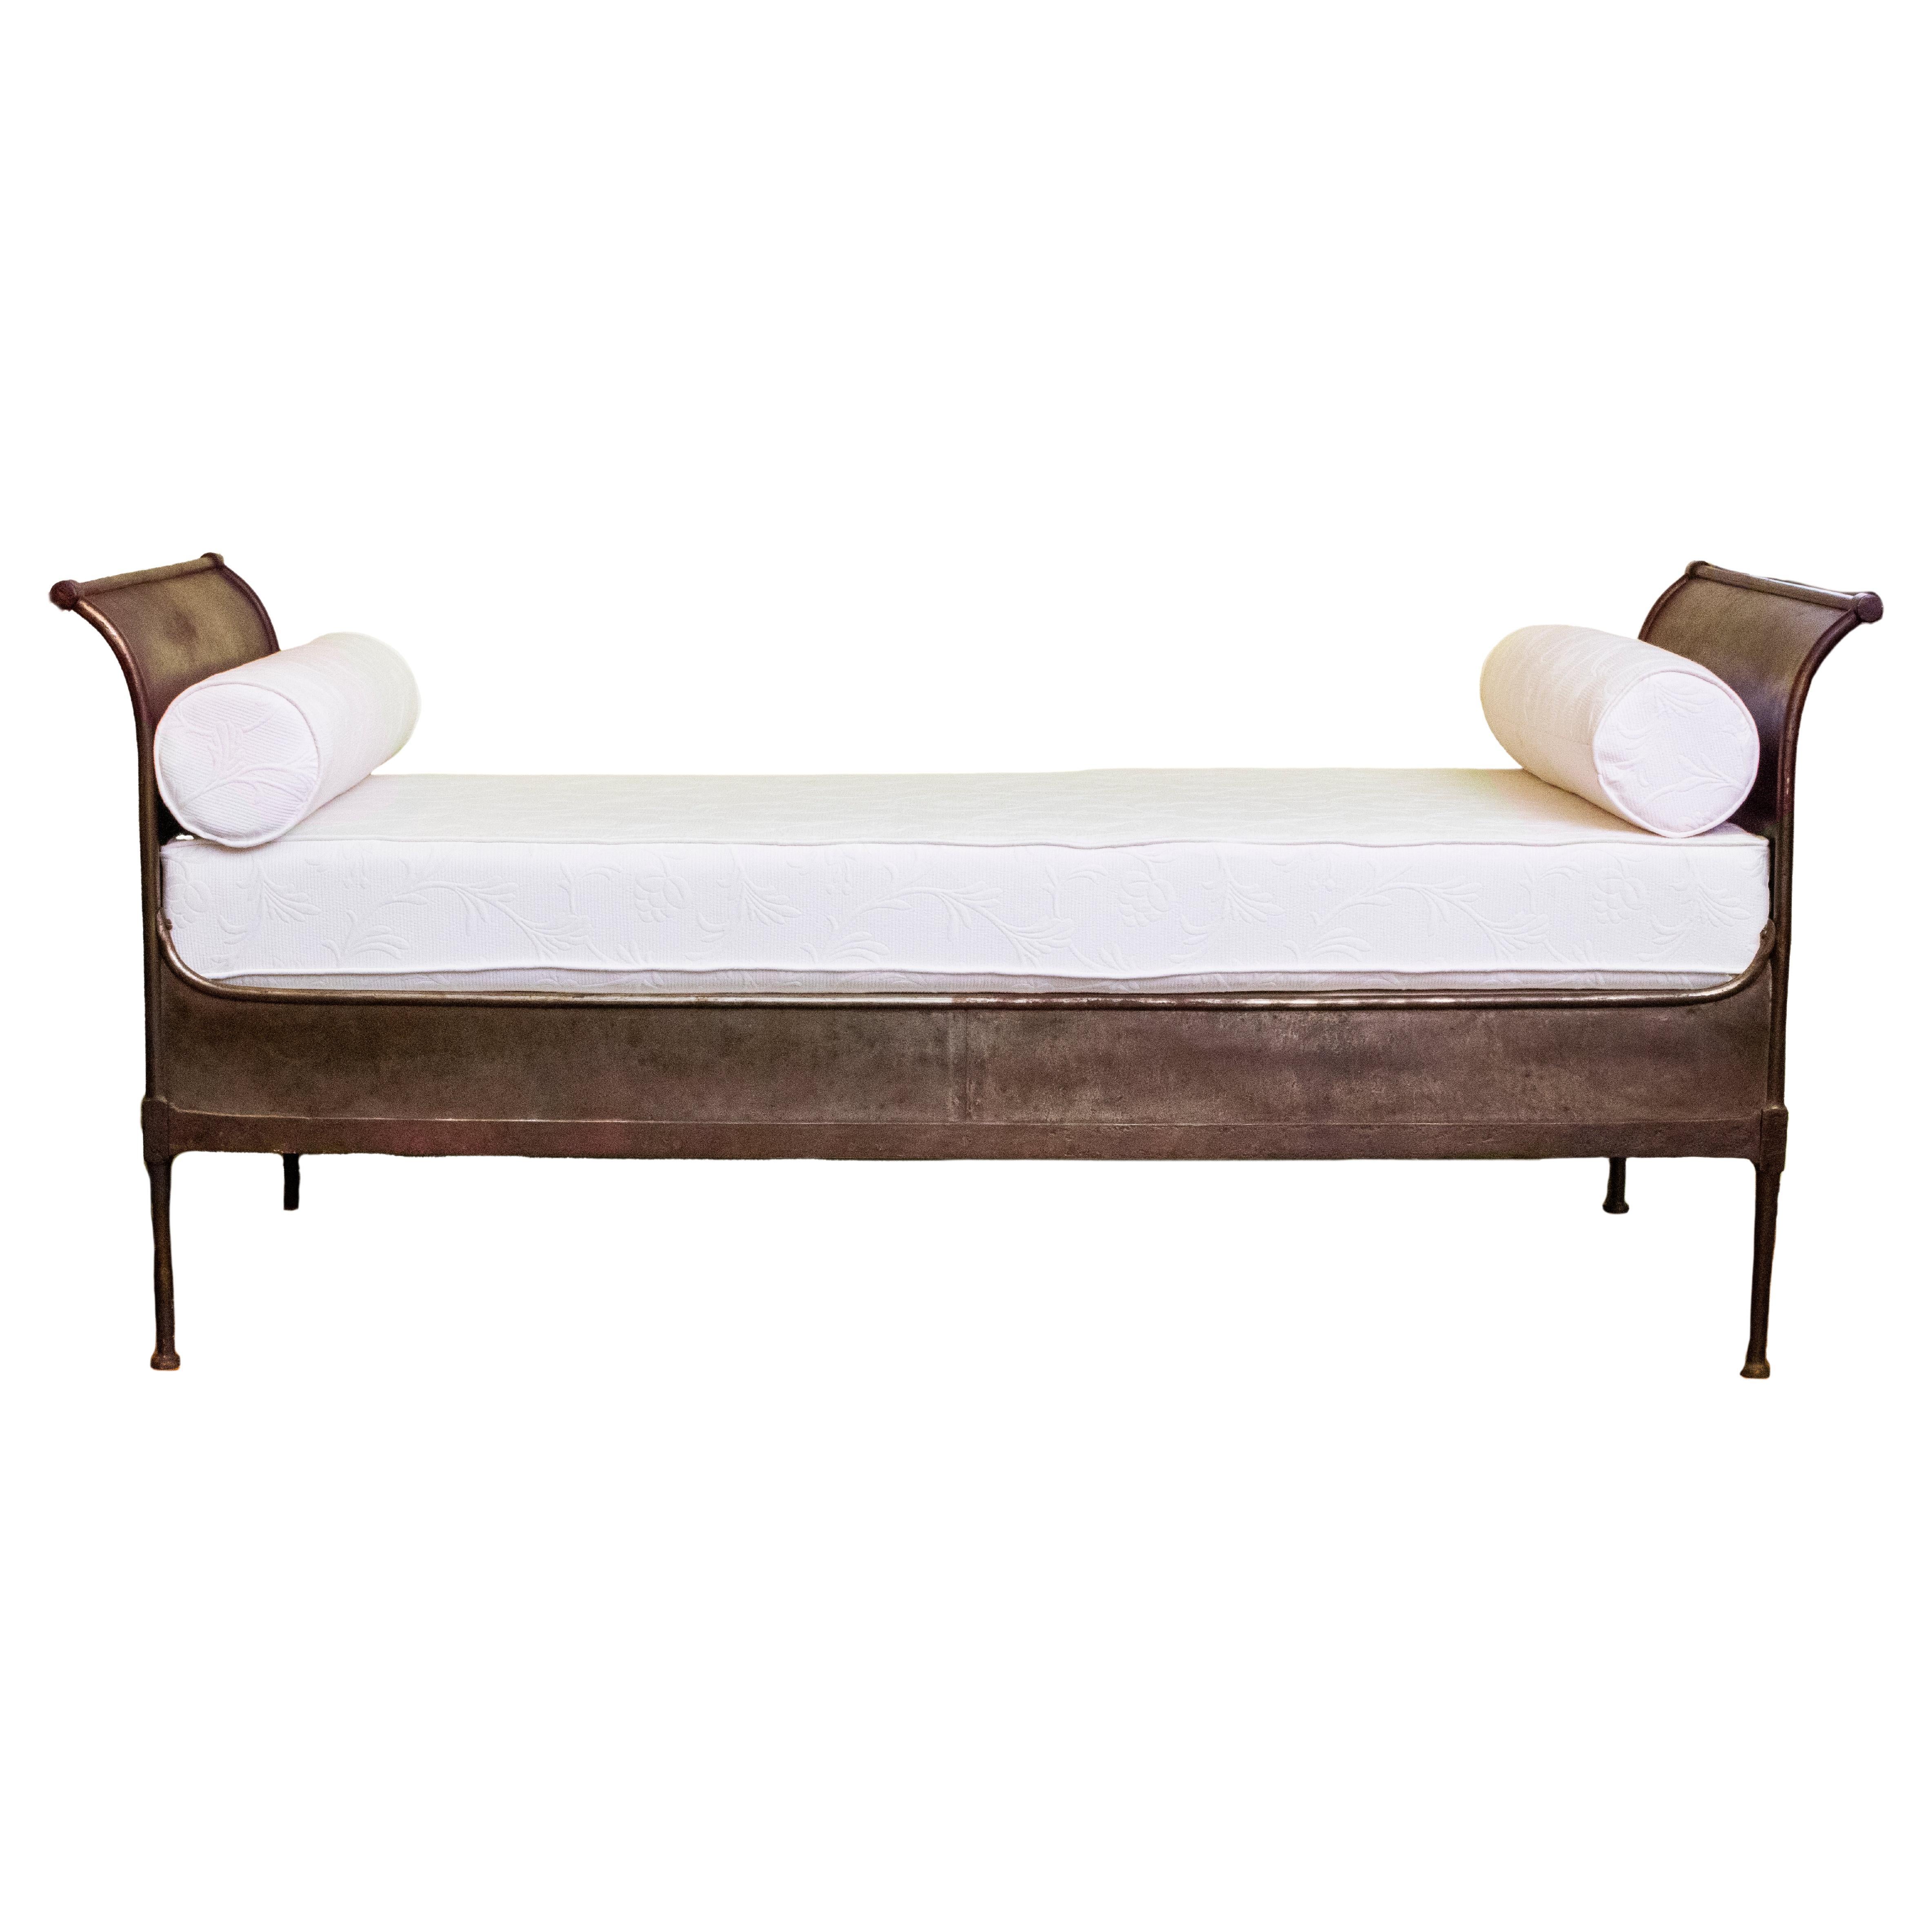 1850s Iron Daybed with New Mattress and Upholstery